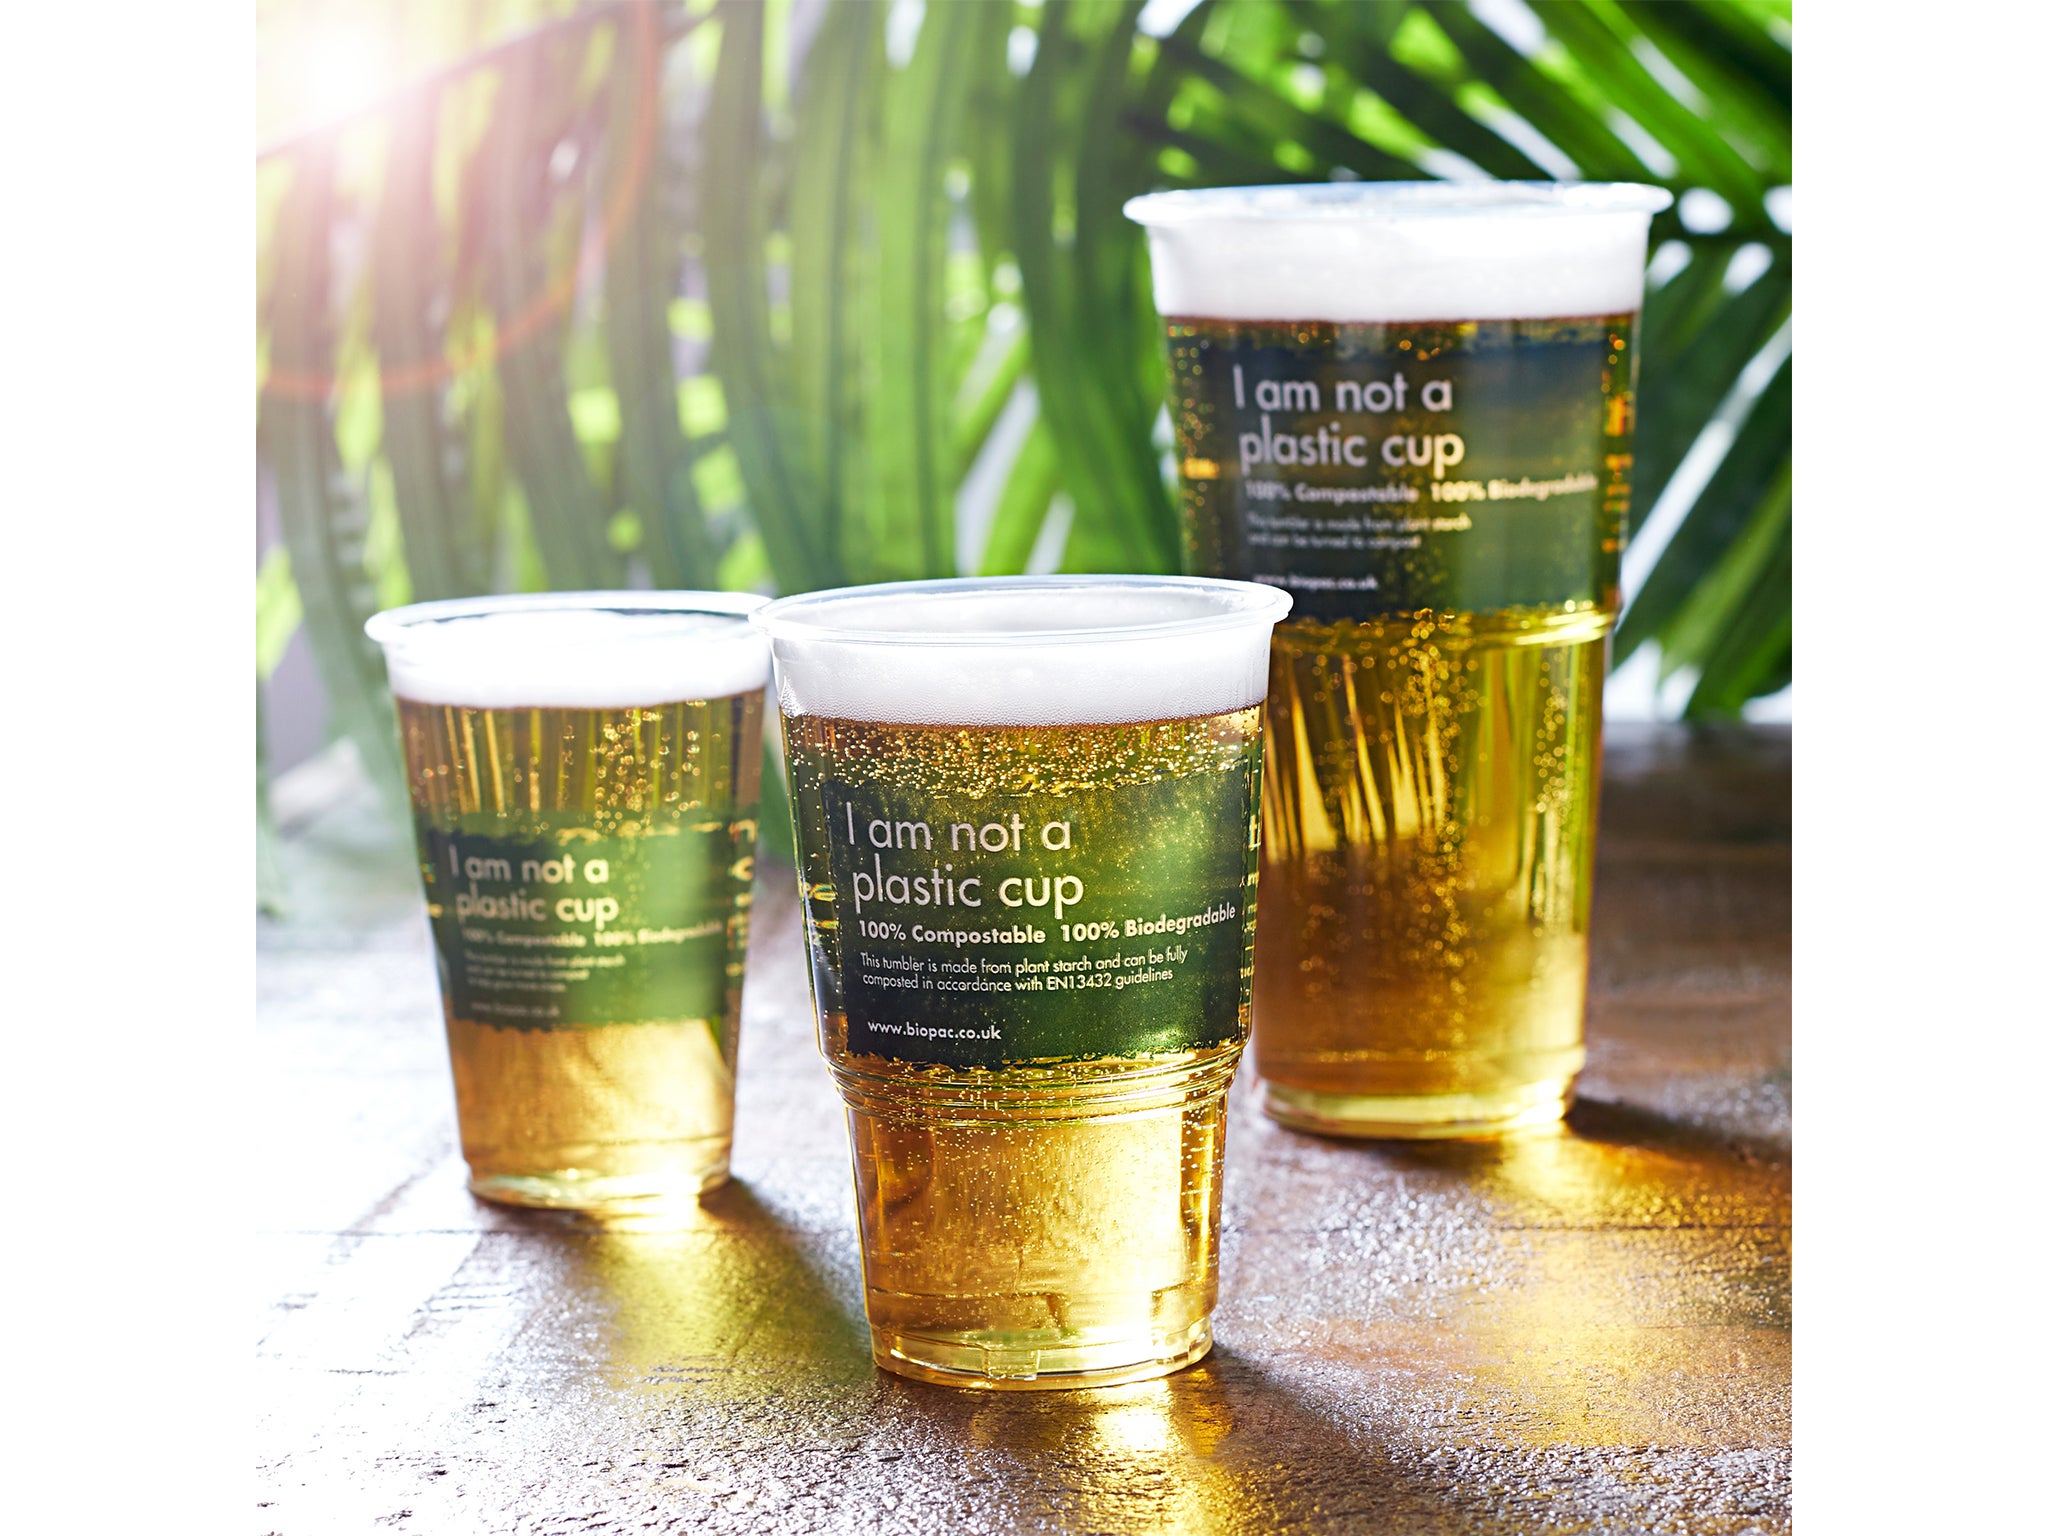 Make your trip to a newly reopened pub an environmentally friendly one with biodegradable pint glasses